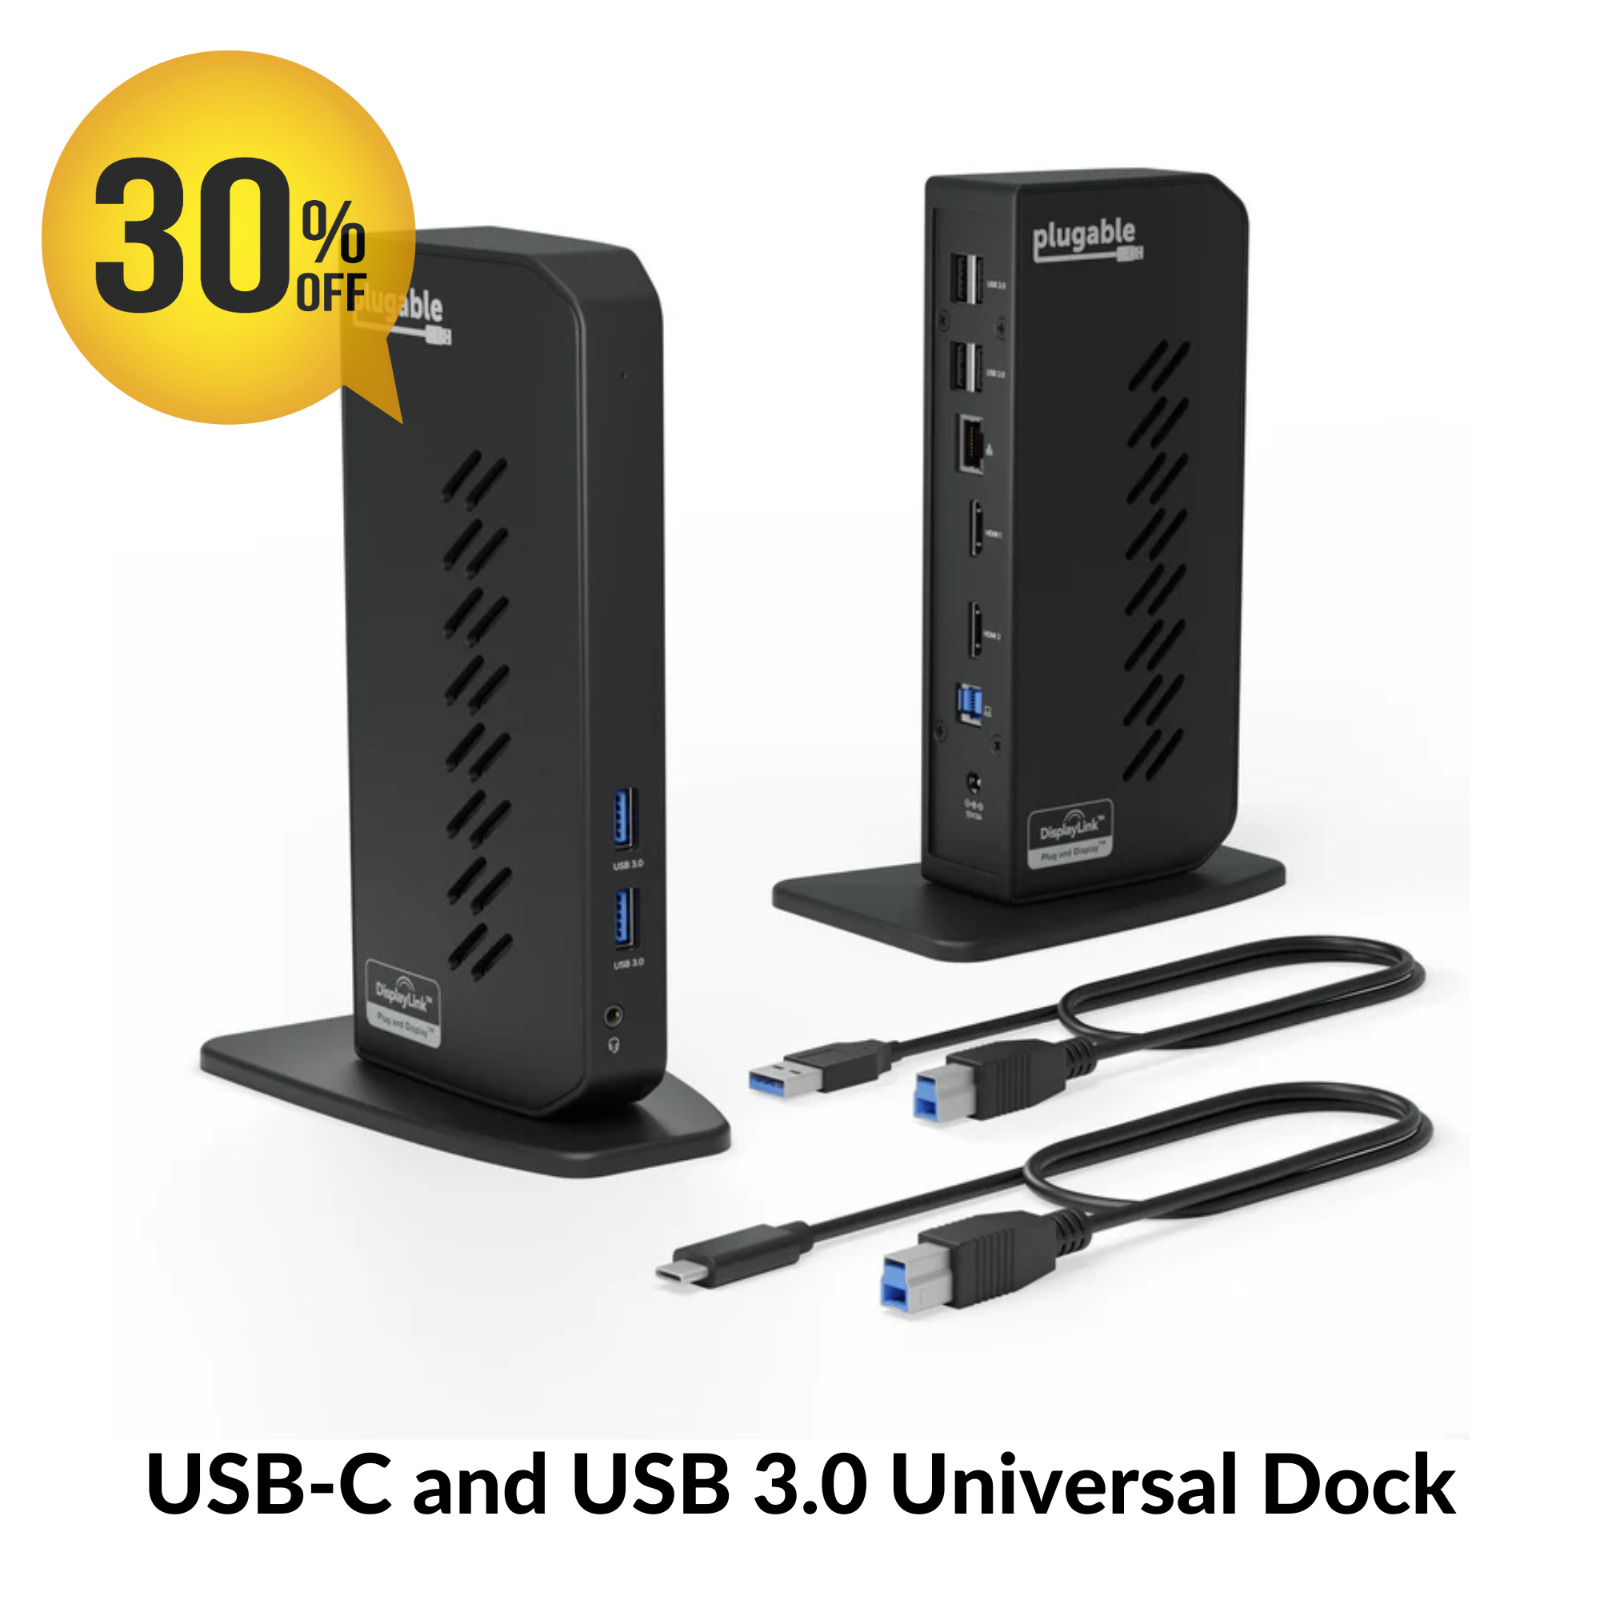 Plugable UD-3900Z 10-in-1 Dual Display HDMI Docking Station, USB-C and USB 3.0